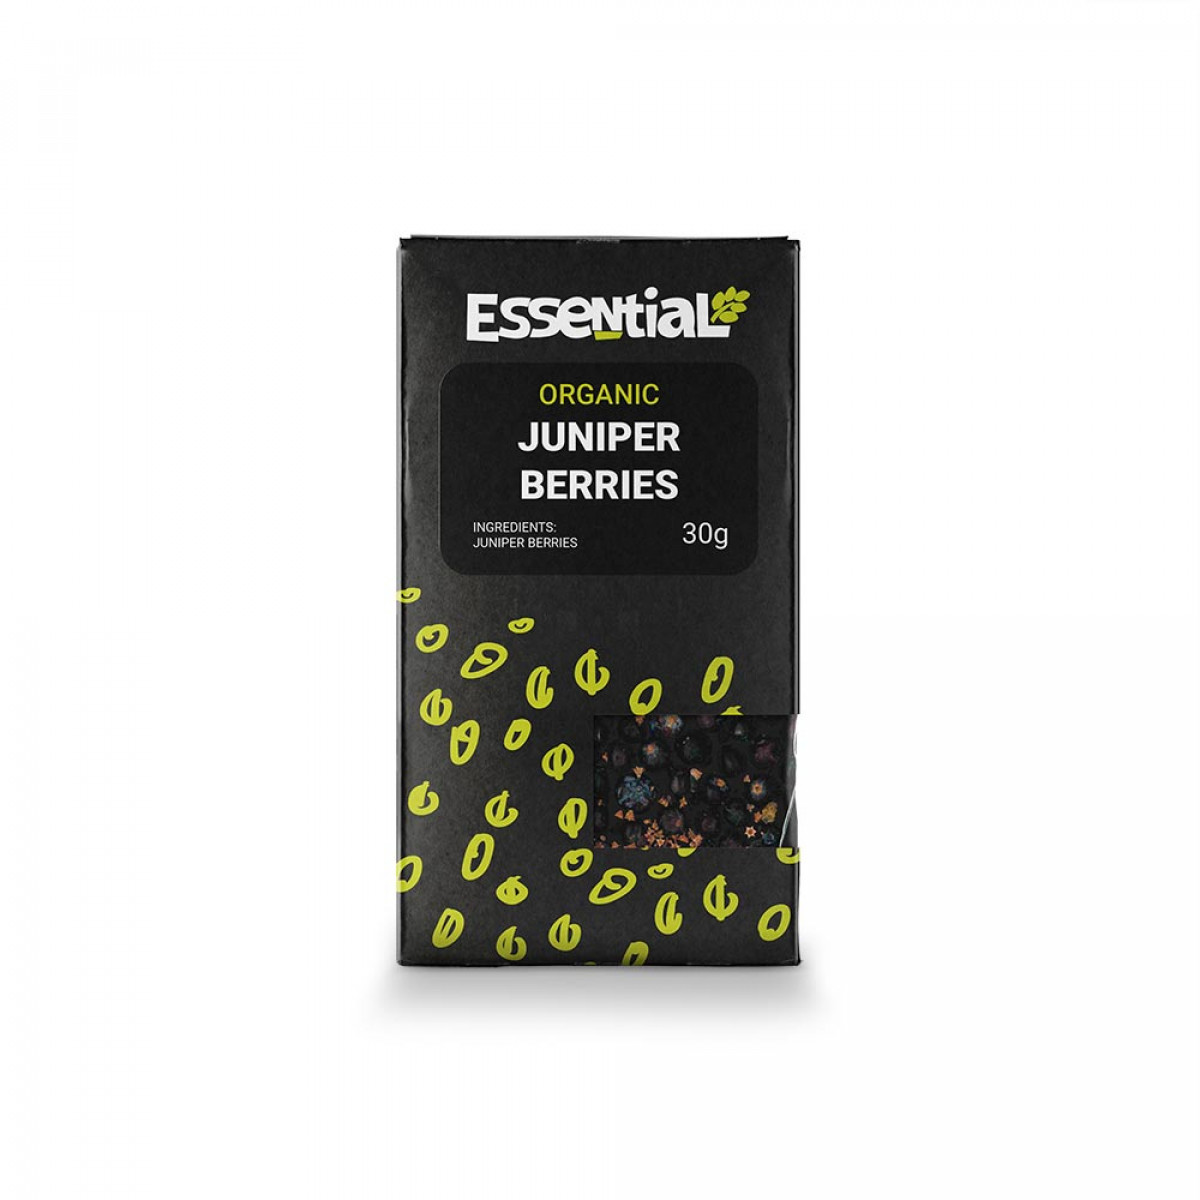 Product picture for Juniper Berries